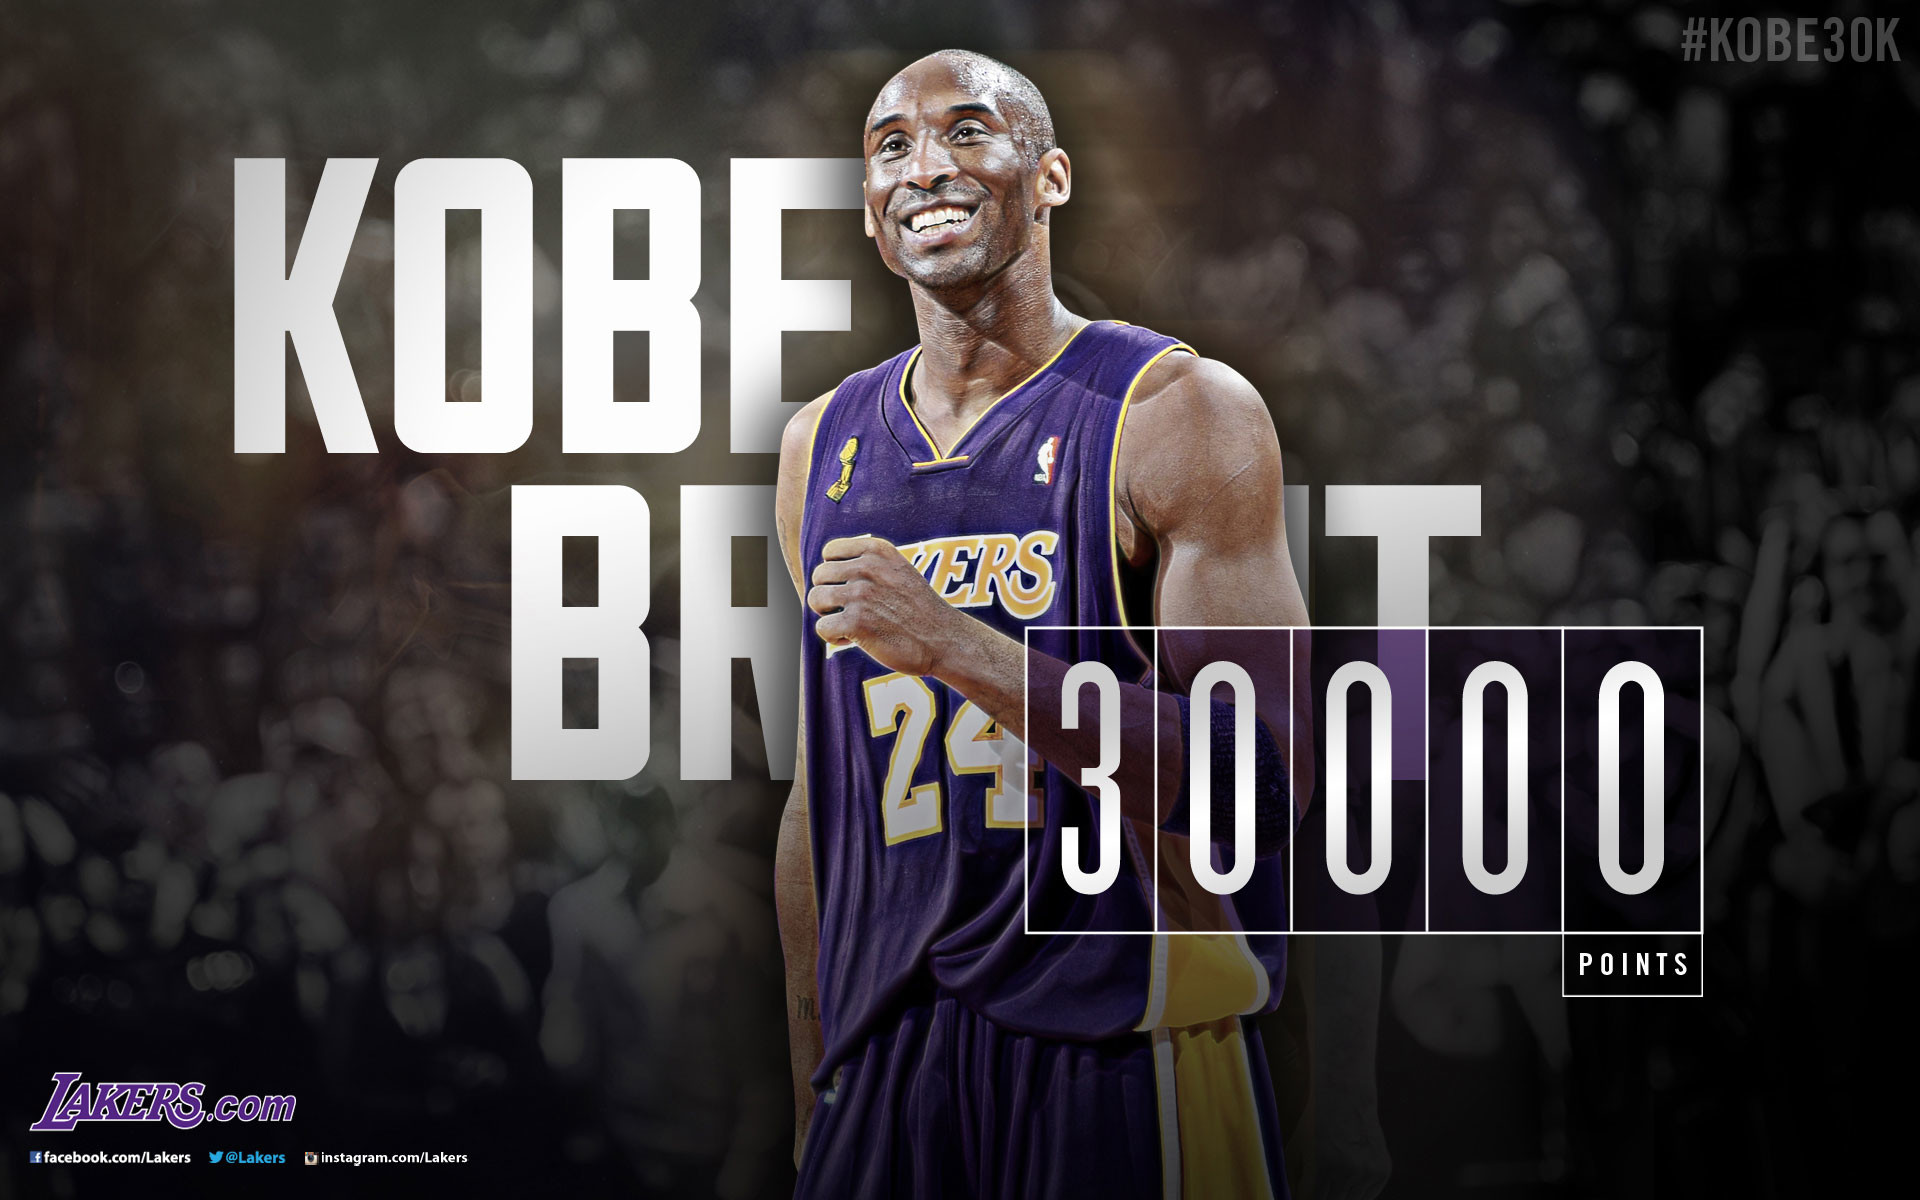 1920x1200 NBA Picture – Kobe Bryant, the Youngest Player to Score 30,000 Points!